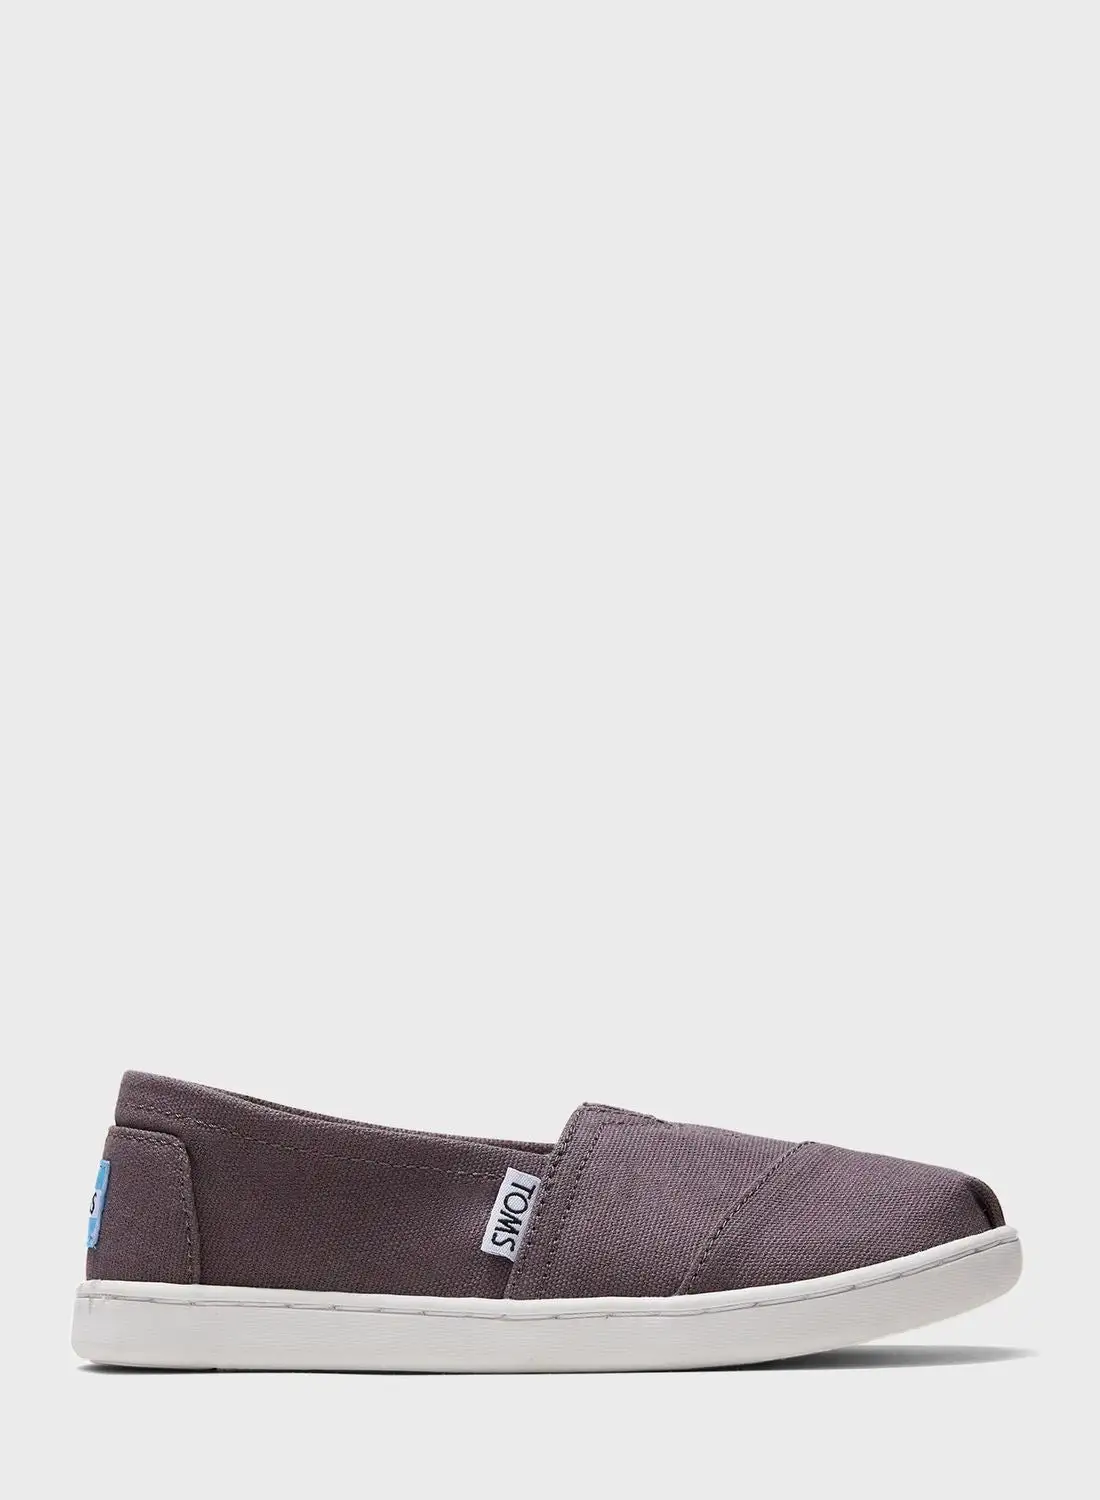 TOMS Youth Casual Slip Ons